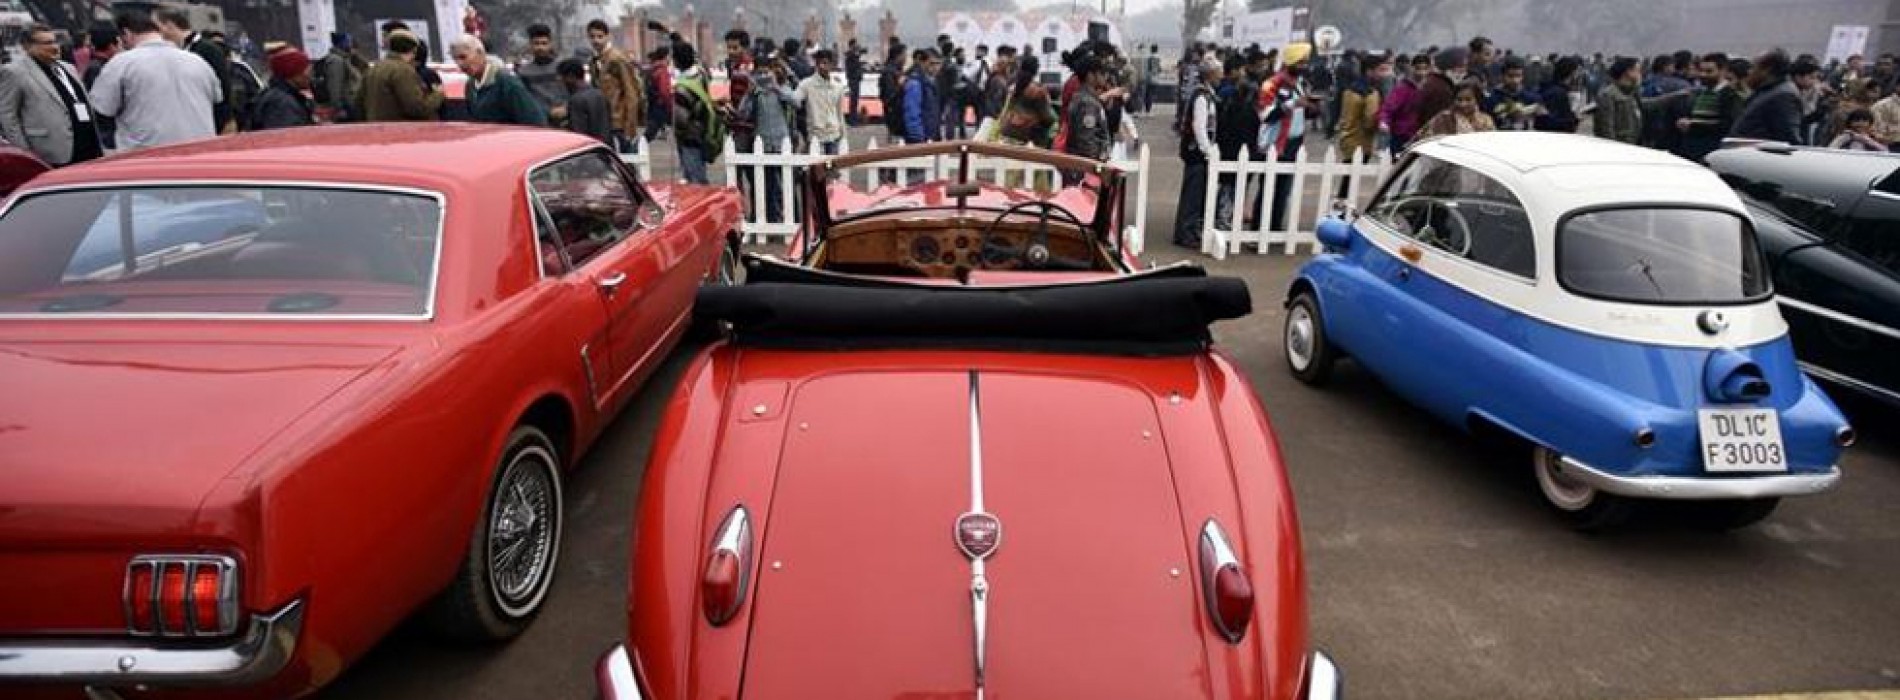 21 Gun Salute Concours Show – spotlight on the future of heritage motoring in India!